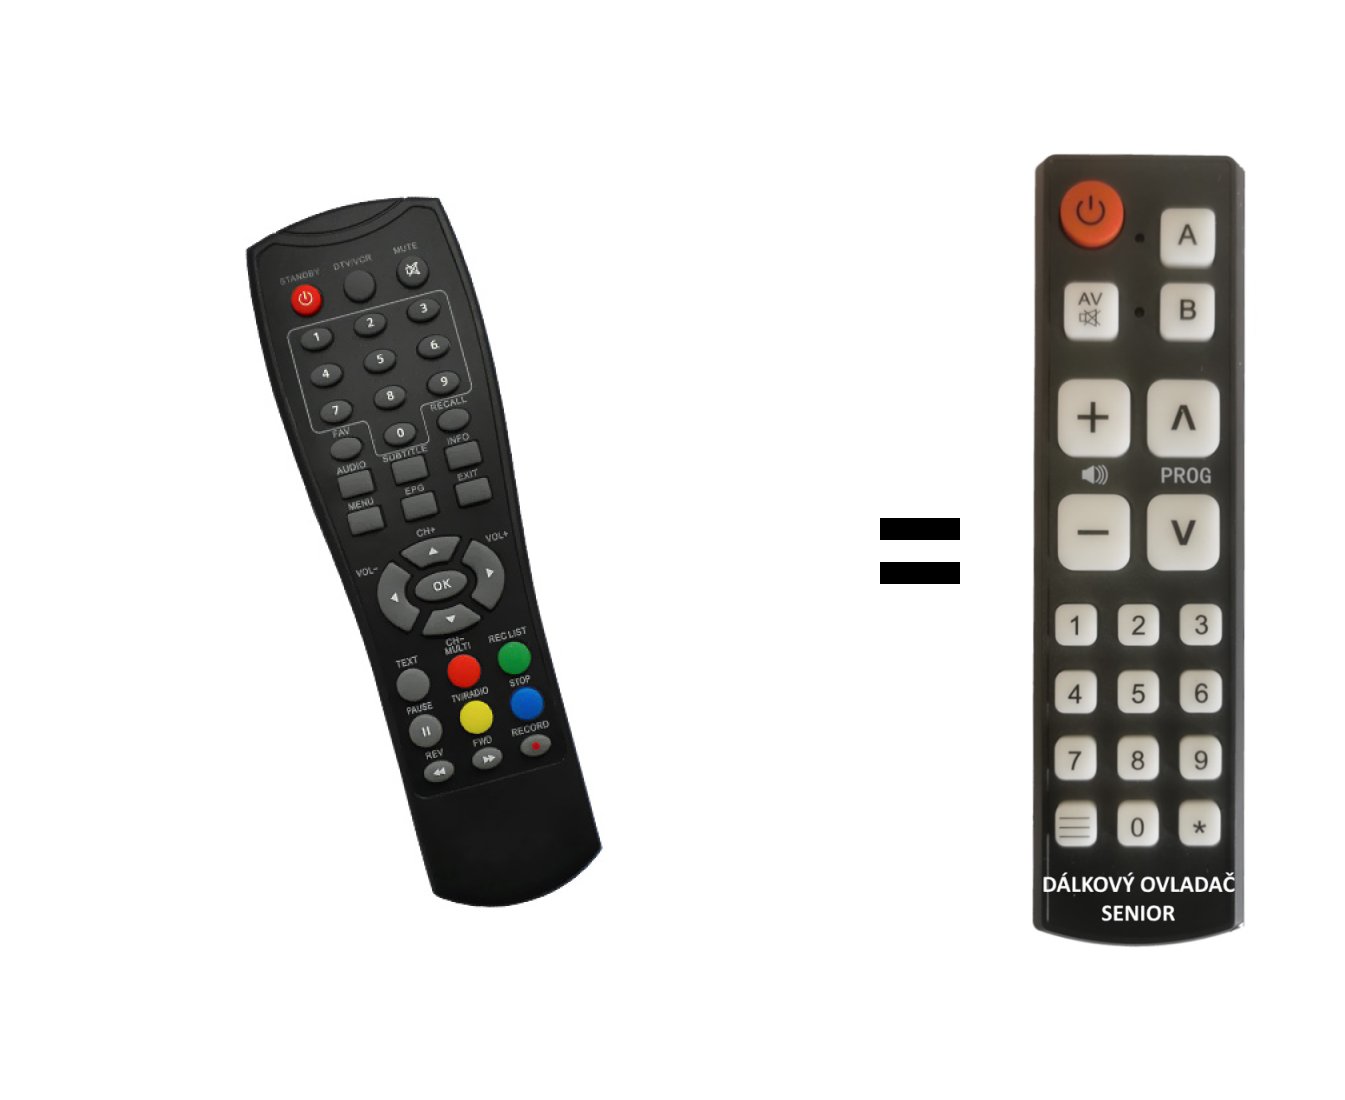 Mascom MC550T, MC550, MC525T, MC510T, Optex ORT8841, Gogen DVB-T137TU replacement remote control for the elderly